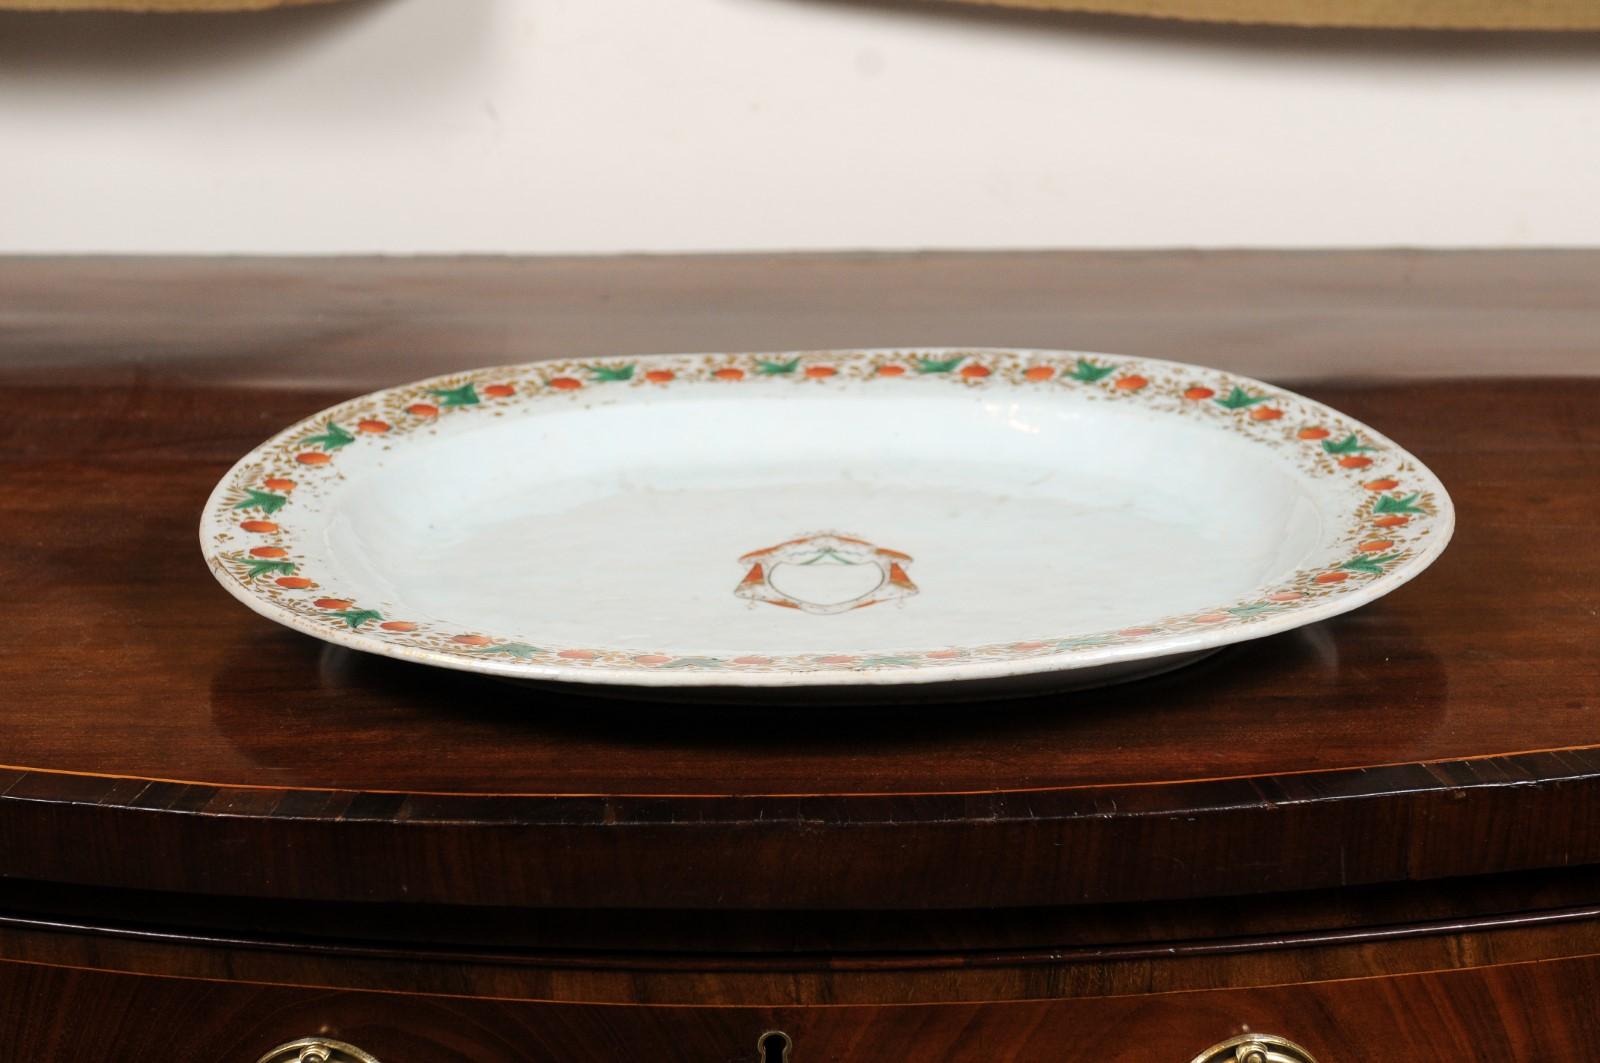 Chinese Export Armorial Porcelain Platter with Strawberry Pattern, 19th Century For Sale 9